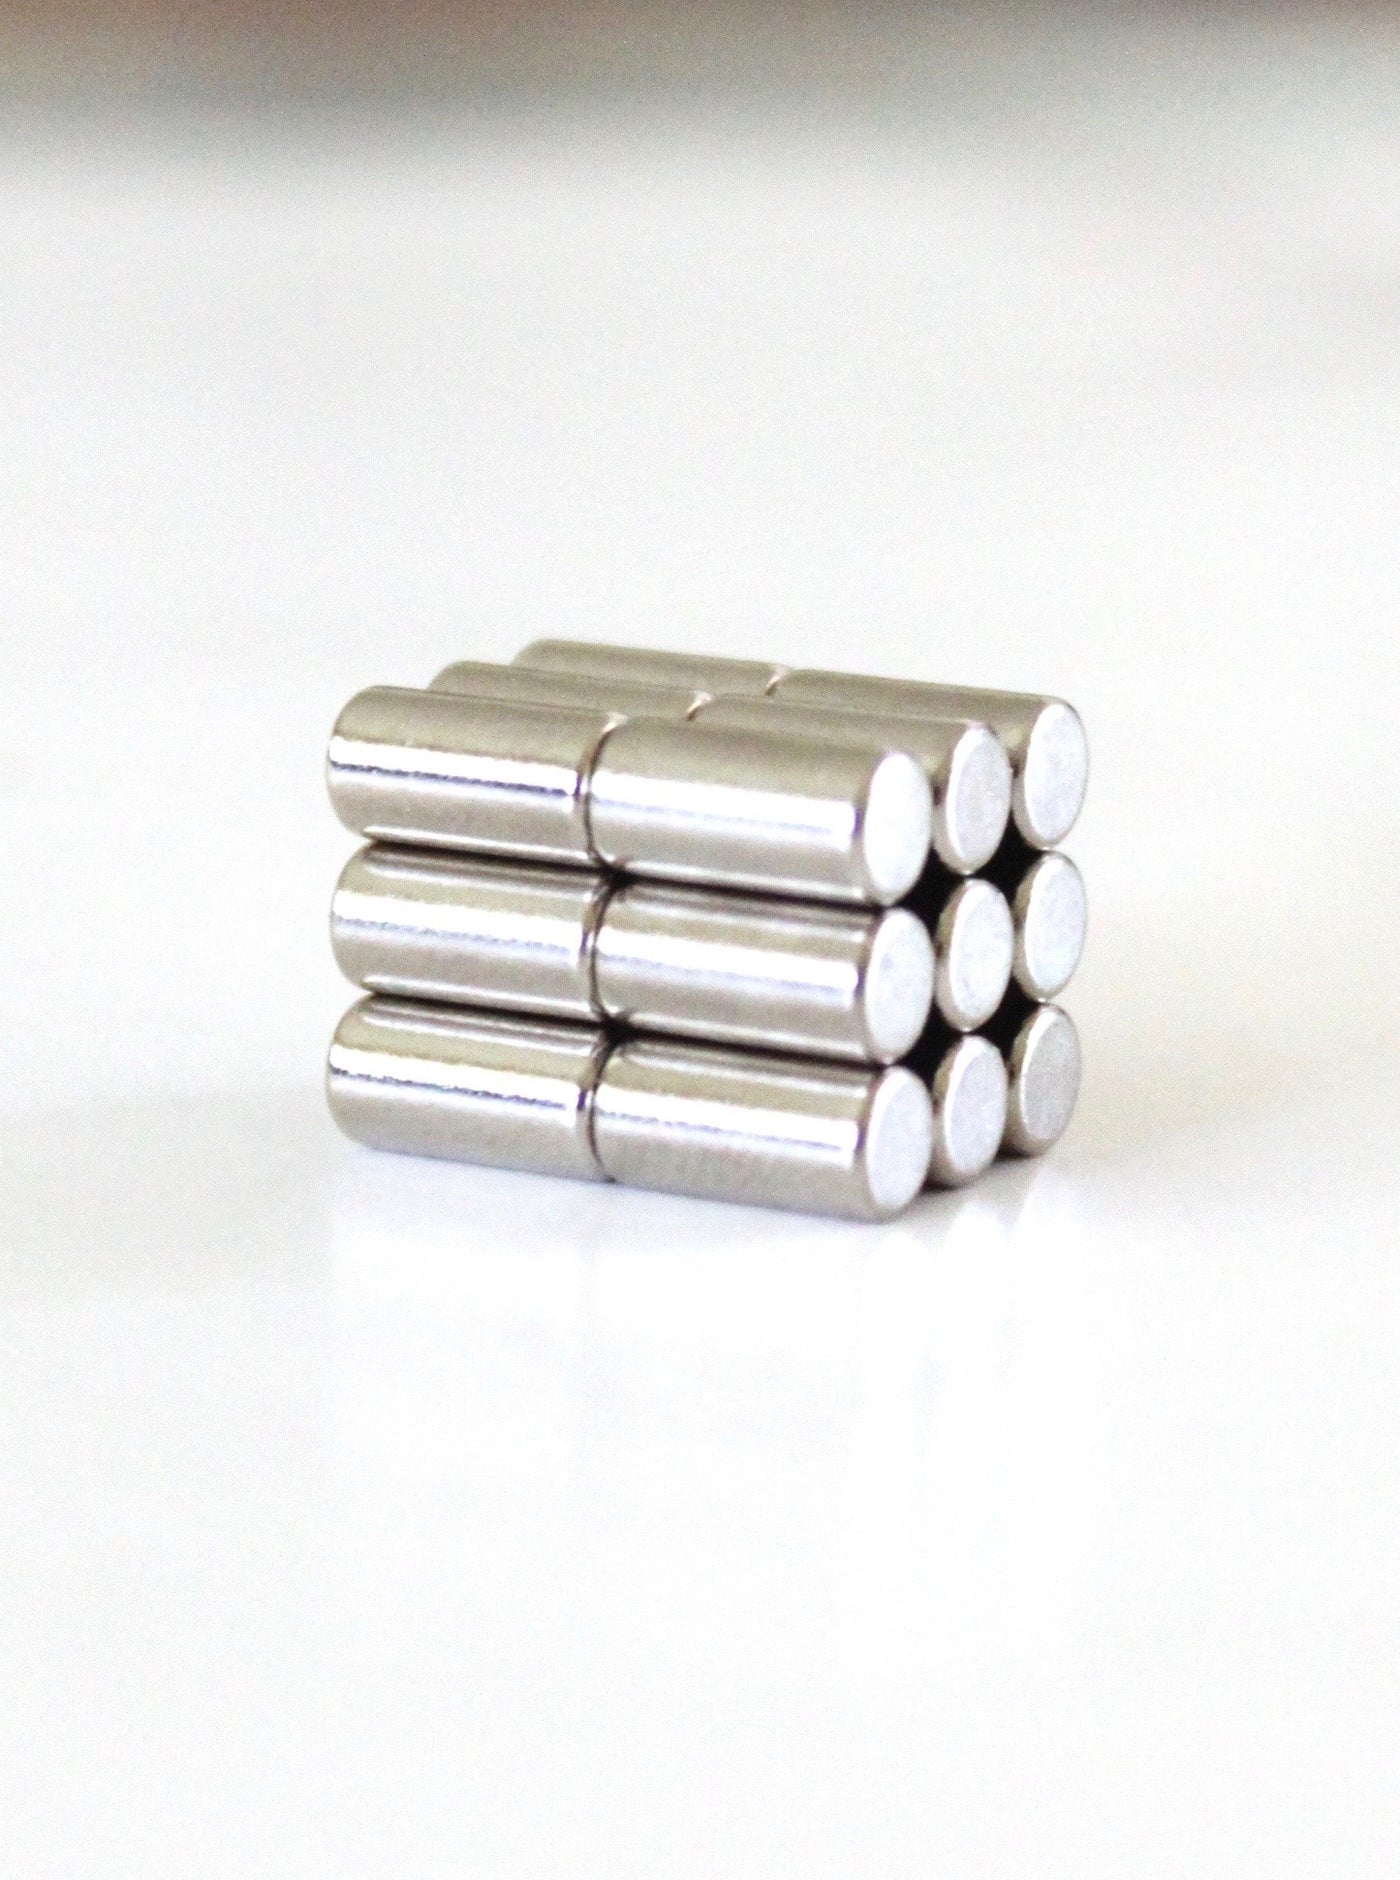 Ultra strong neodymium magnets | Rare Earth Magnets